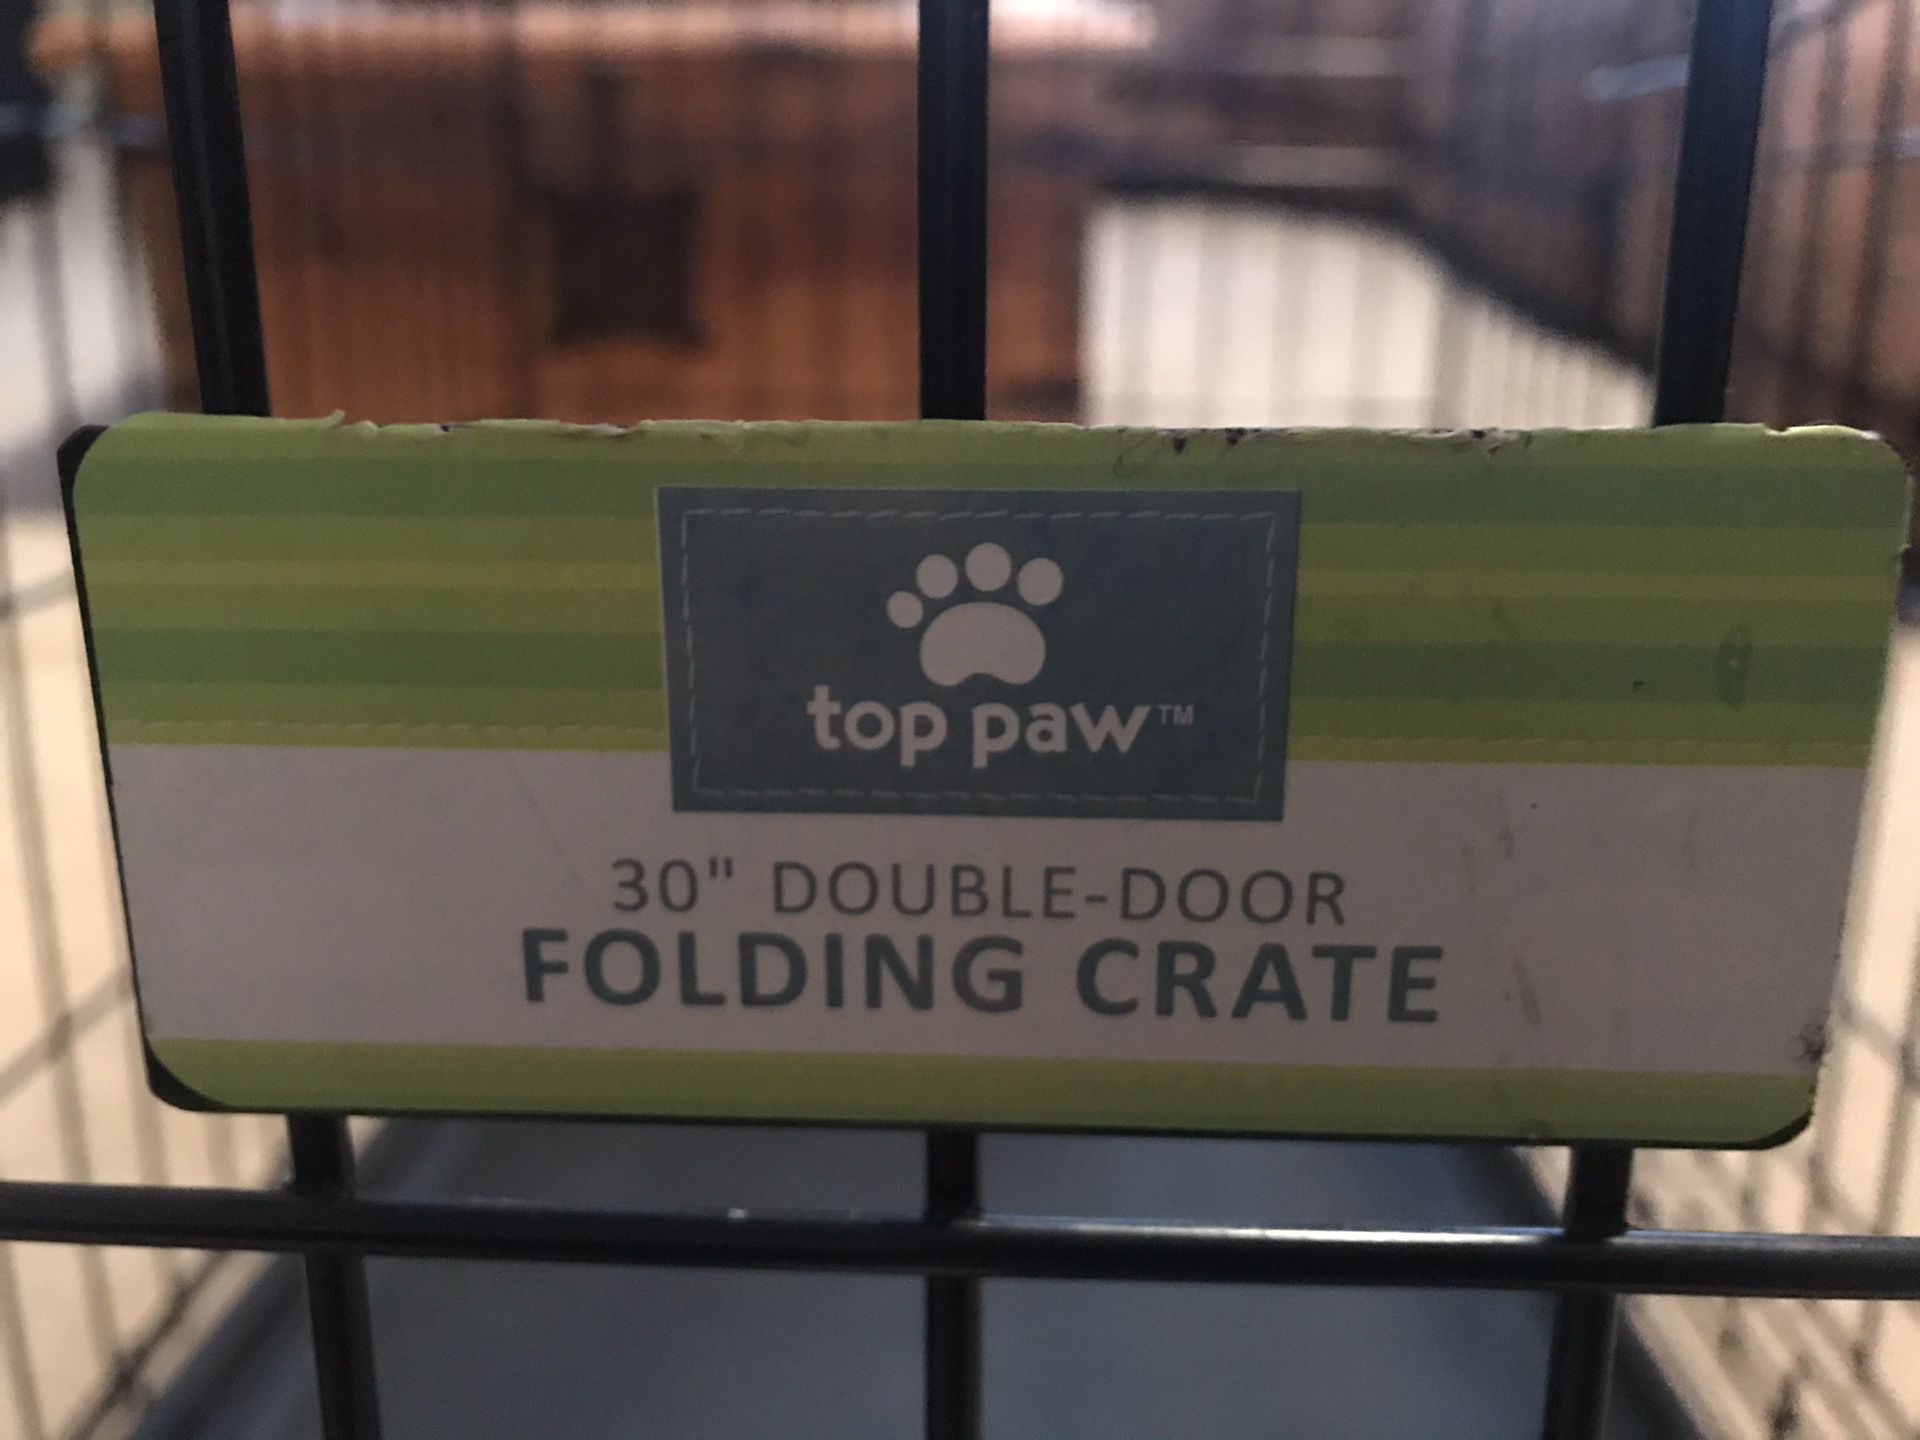 Top Paw 30” dog crate